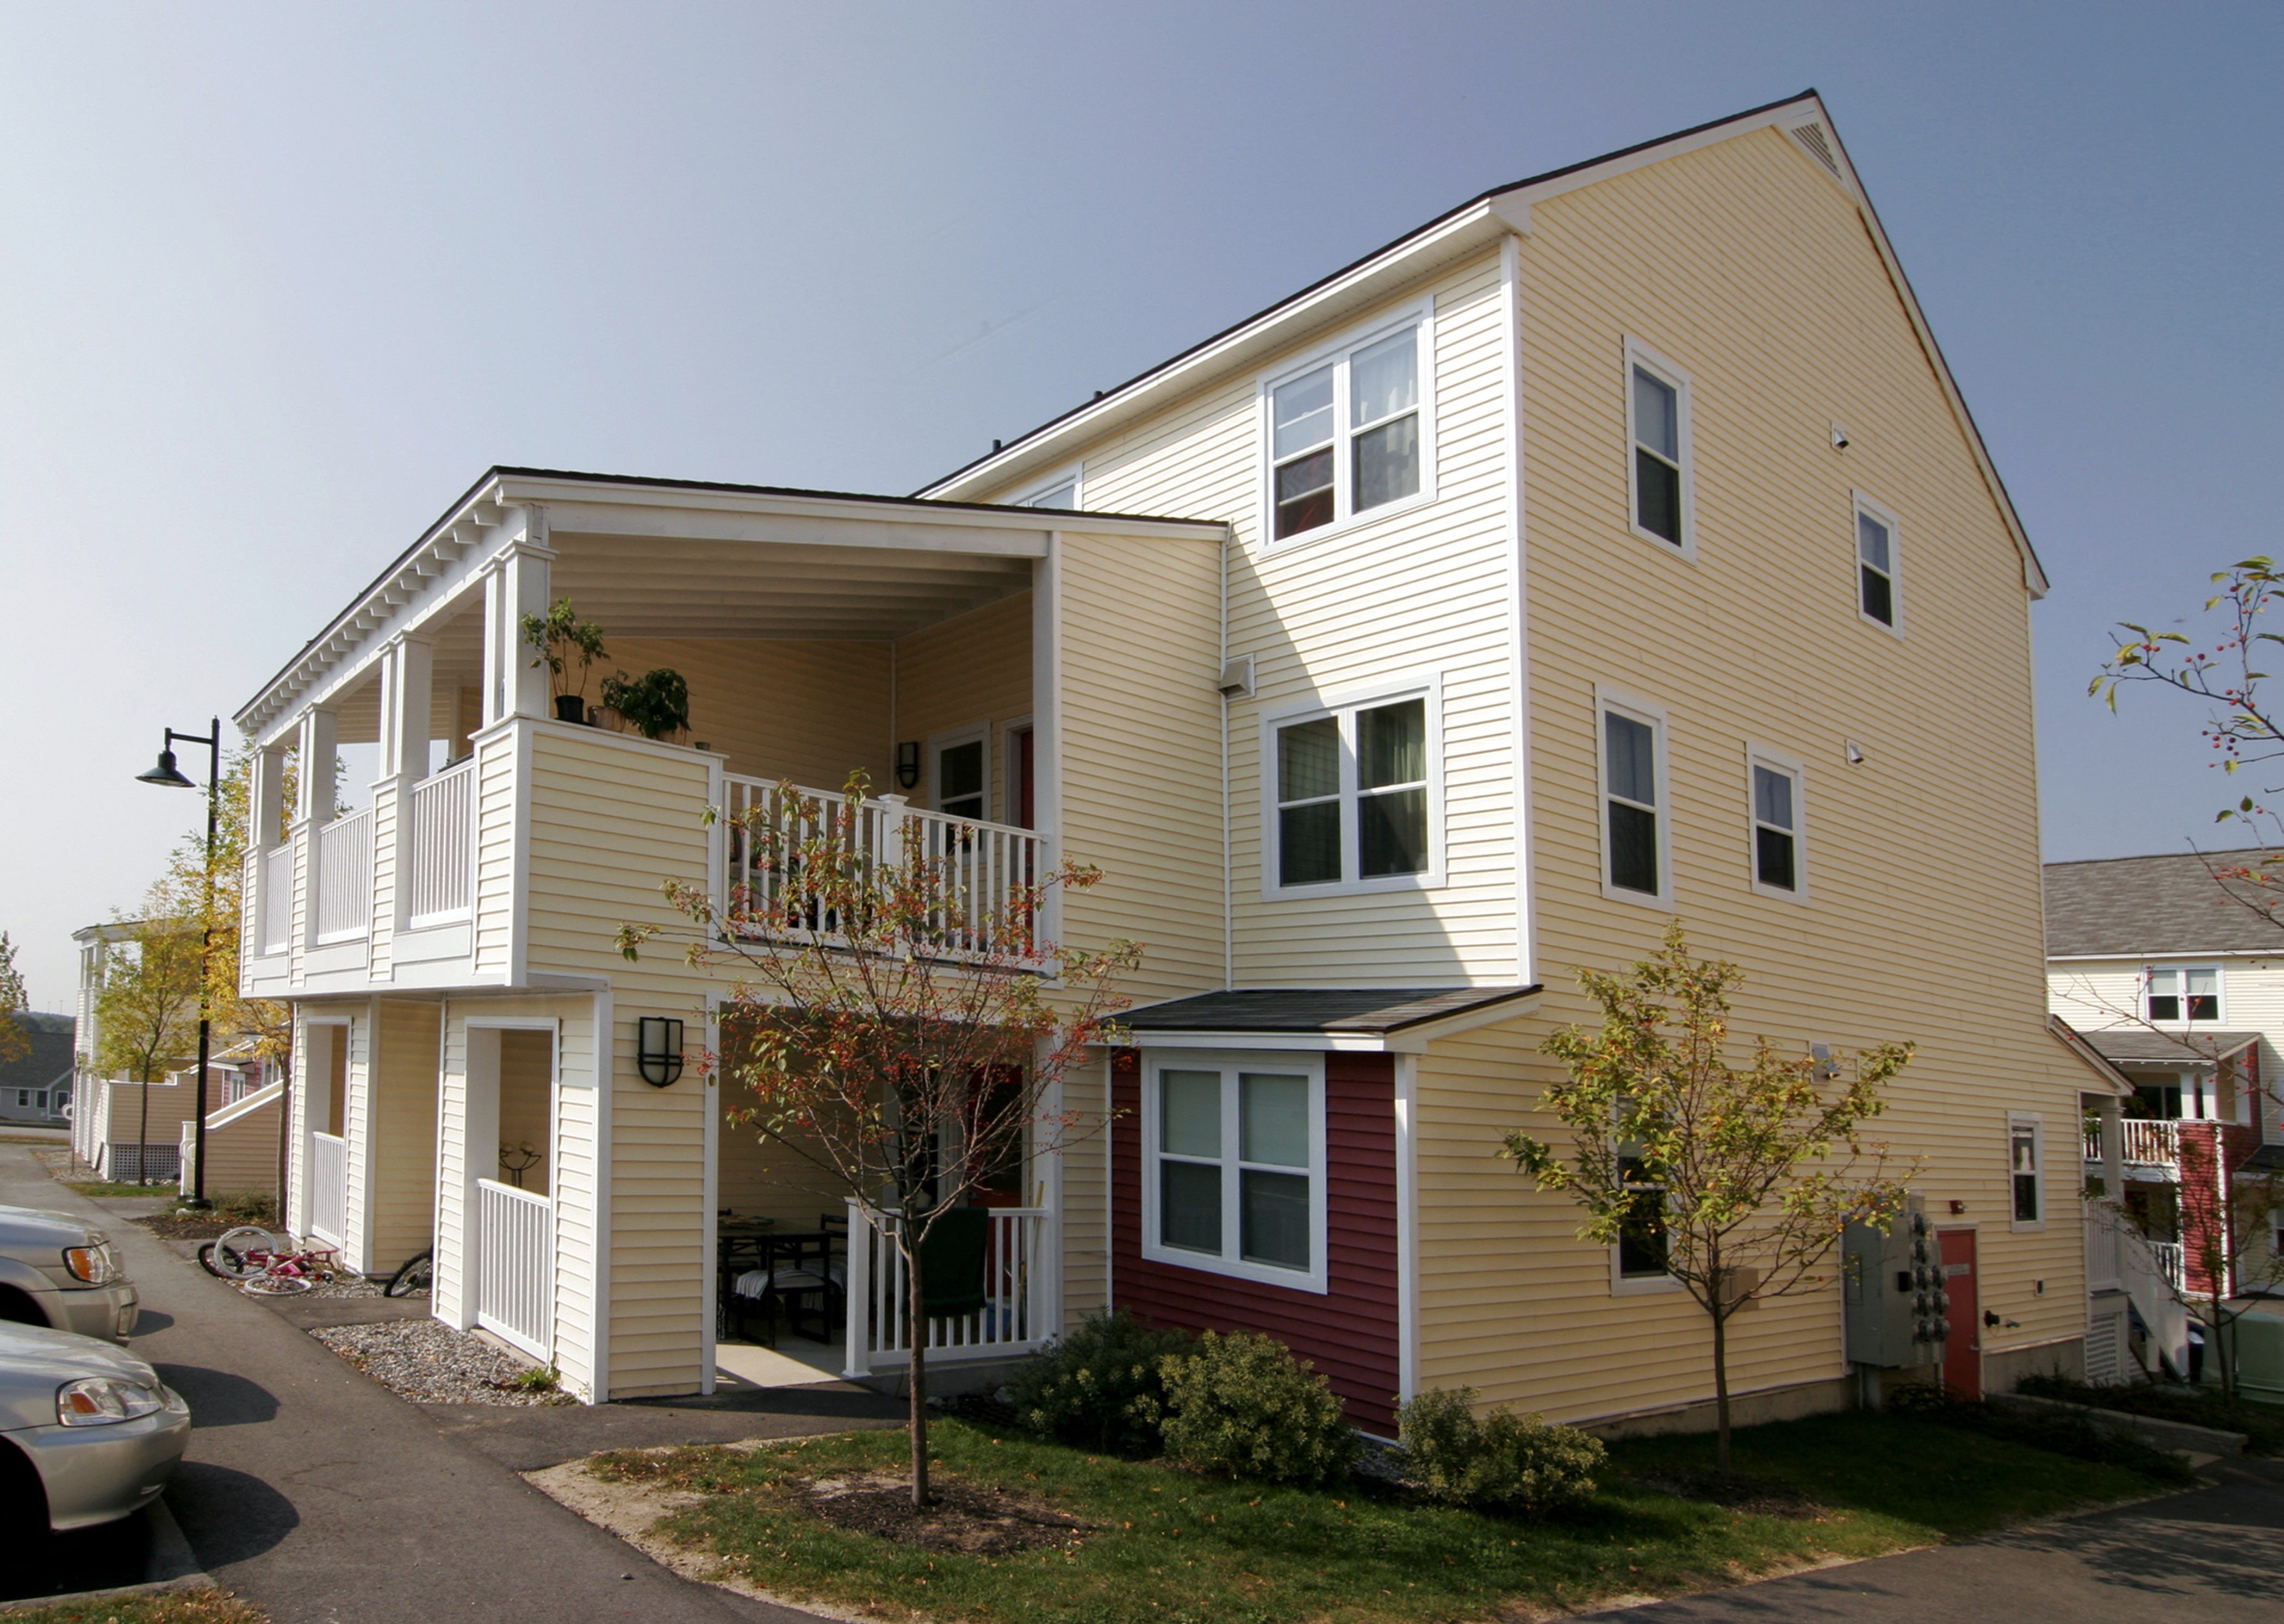 Brick Hill Townhouses - Apartments in South Portland, ME